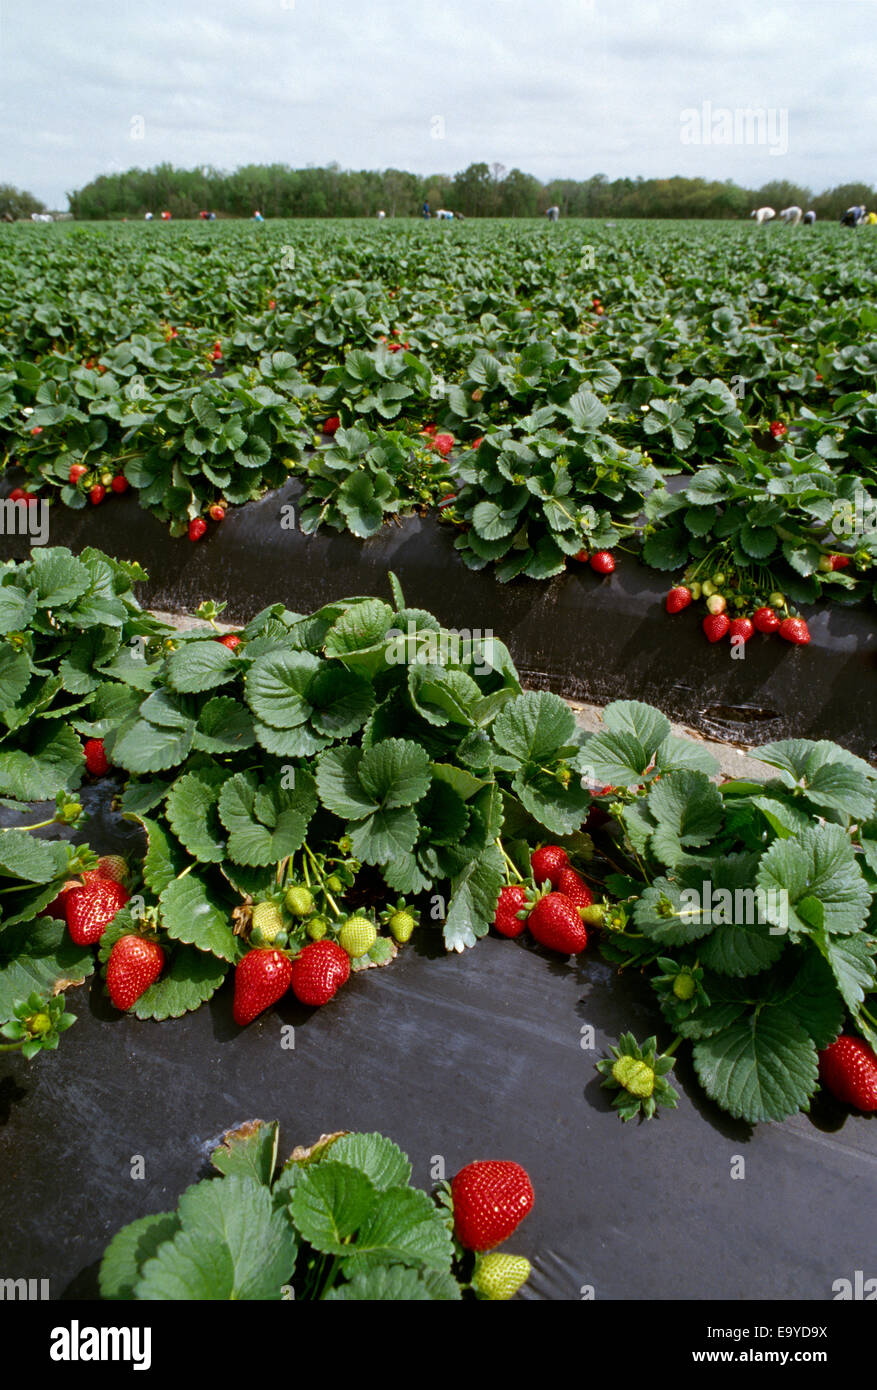 Agriculture - Strawberry fields with field workers harvesting in the background / Plant City, Florida, USA. Stock Photo